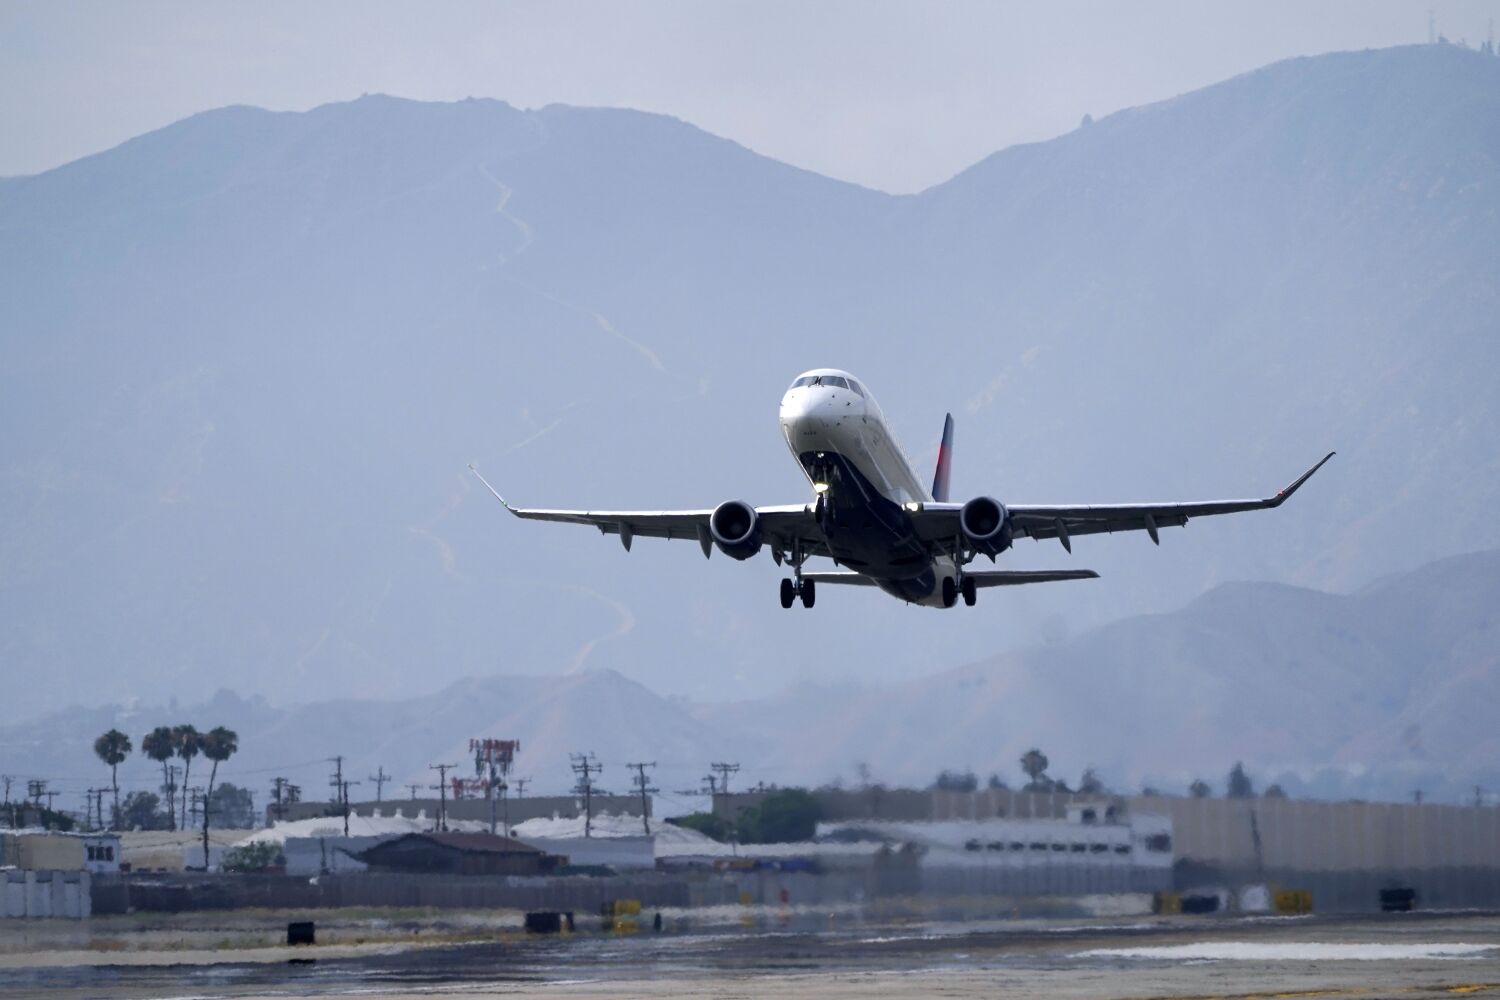 Burbank aborted landing was latest close call for U.S. flights. Here's why experts say not to worry